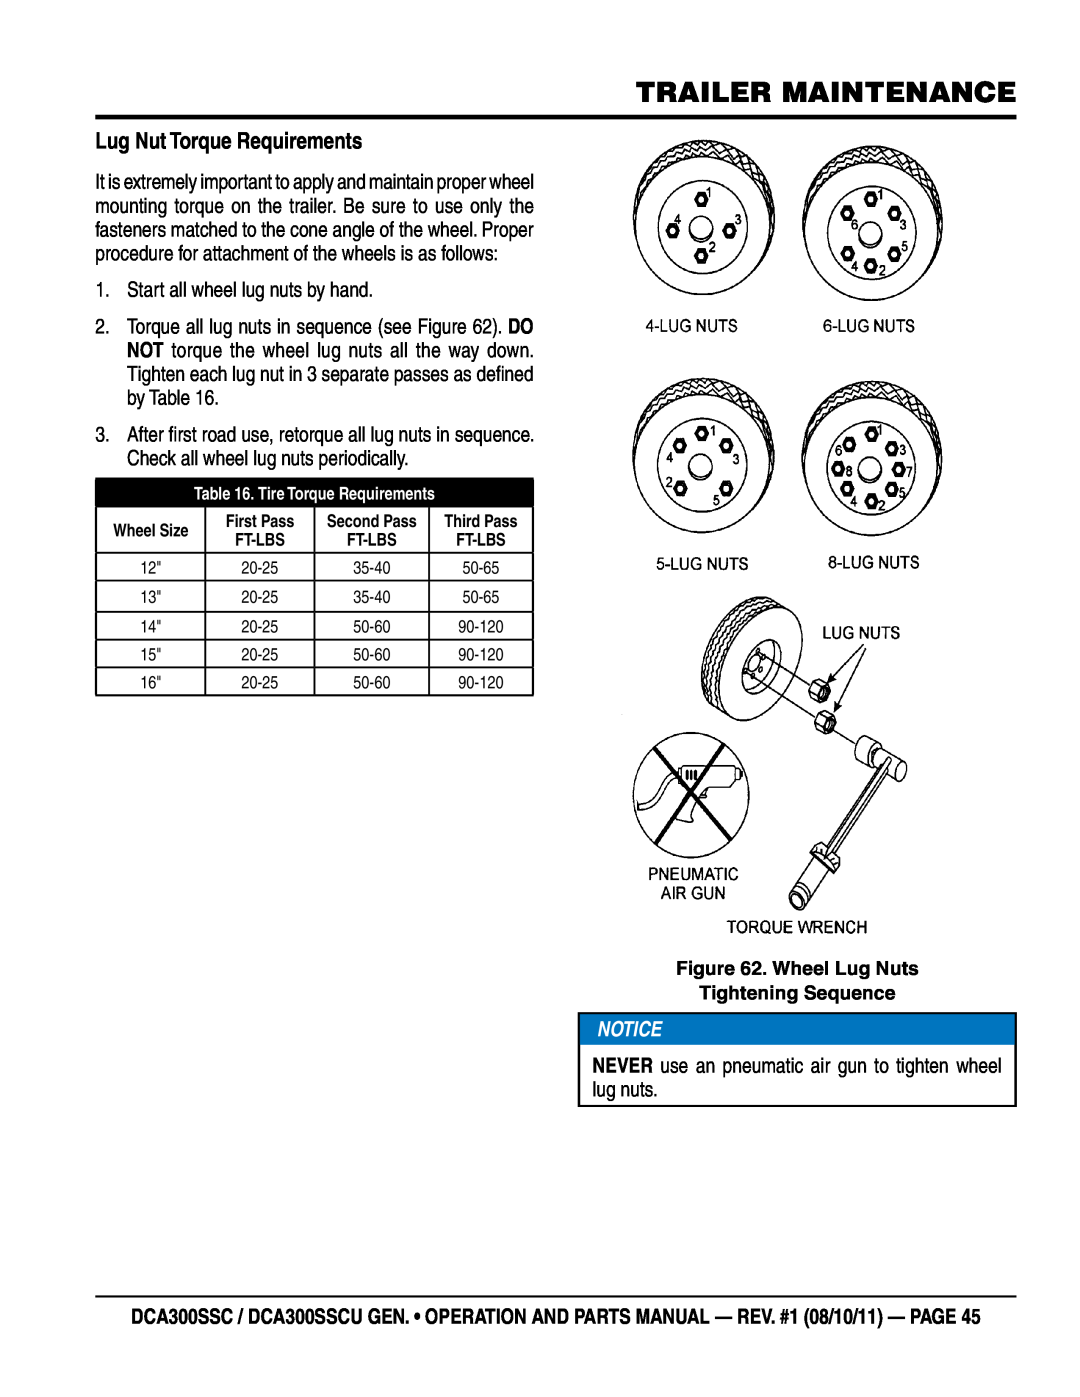 Multiquip DCA300SSCU Lug Nut Torque Requirements, Trailer Maintenance, Wheel Lug Nuts Tightening Sequence, Wheel Size 